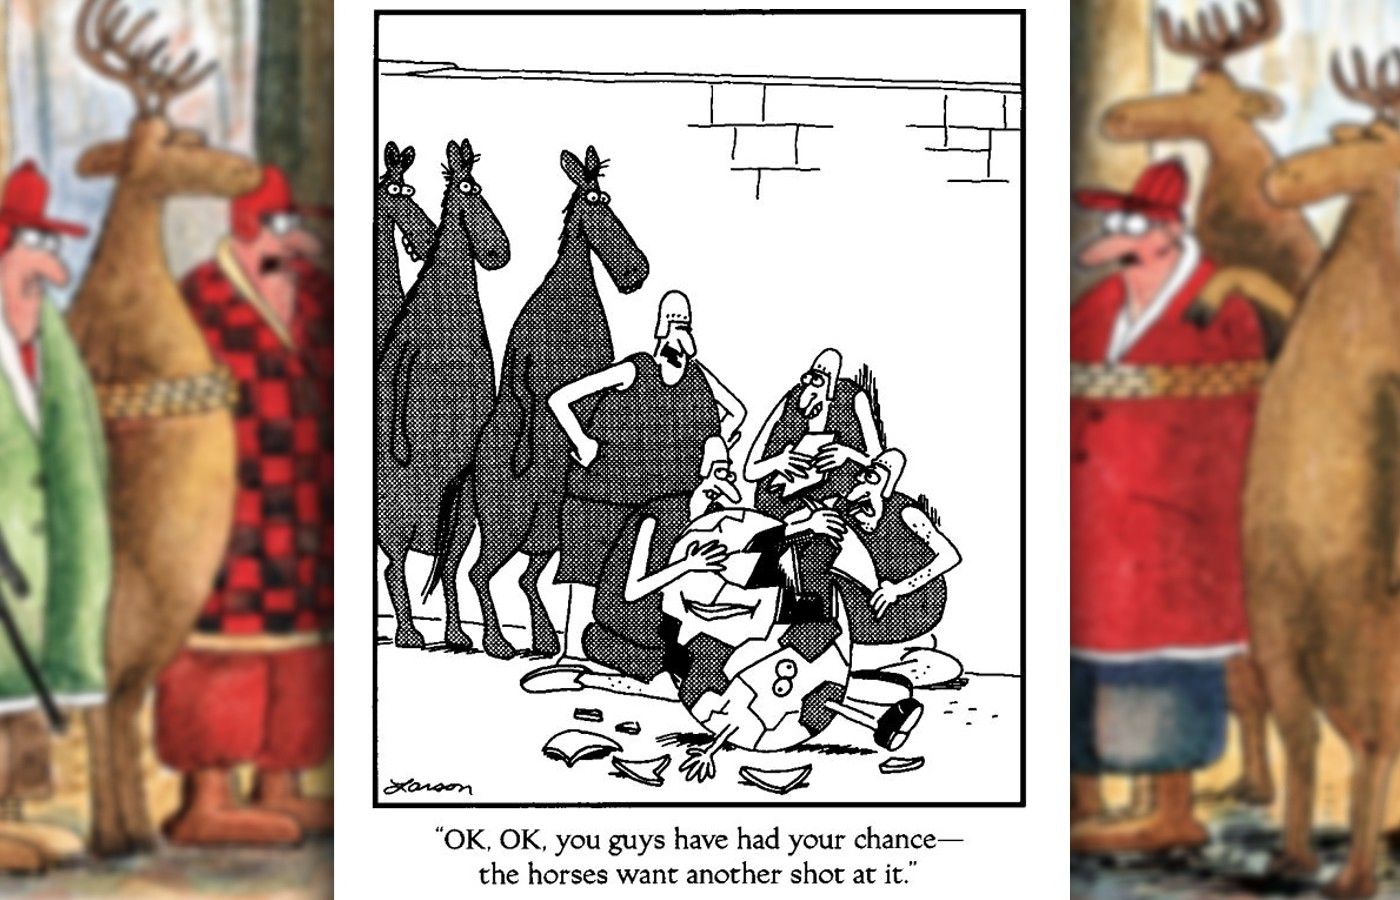 far side comic where the king's men try to put humpty together again